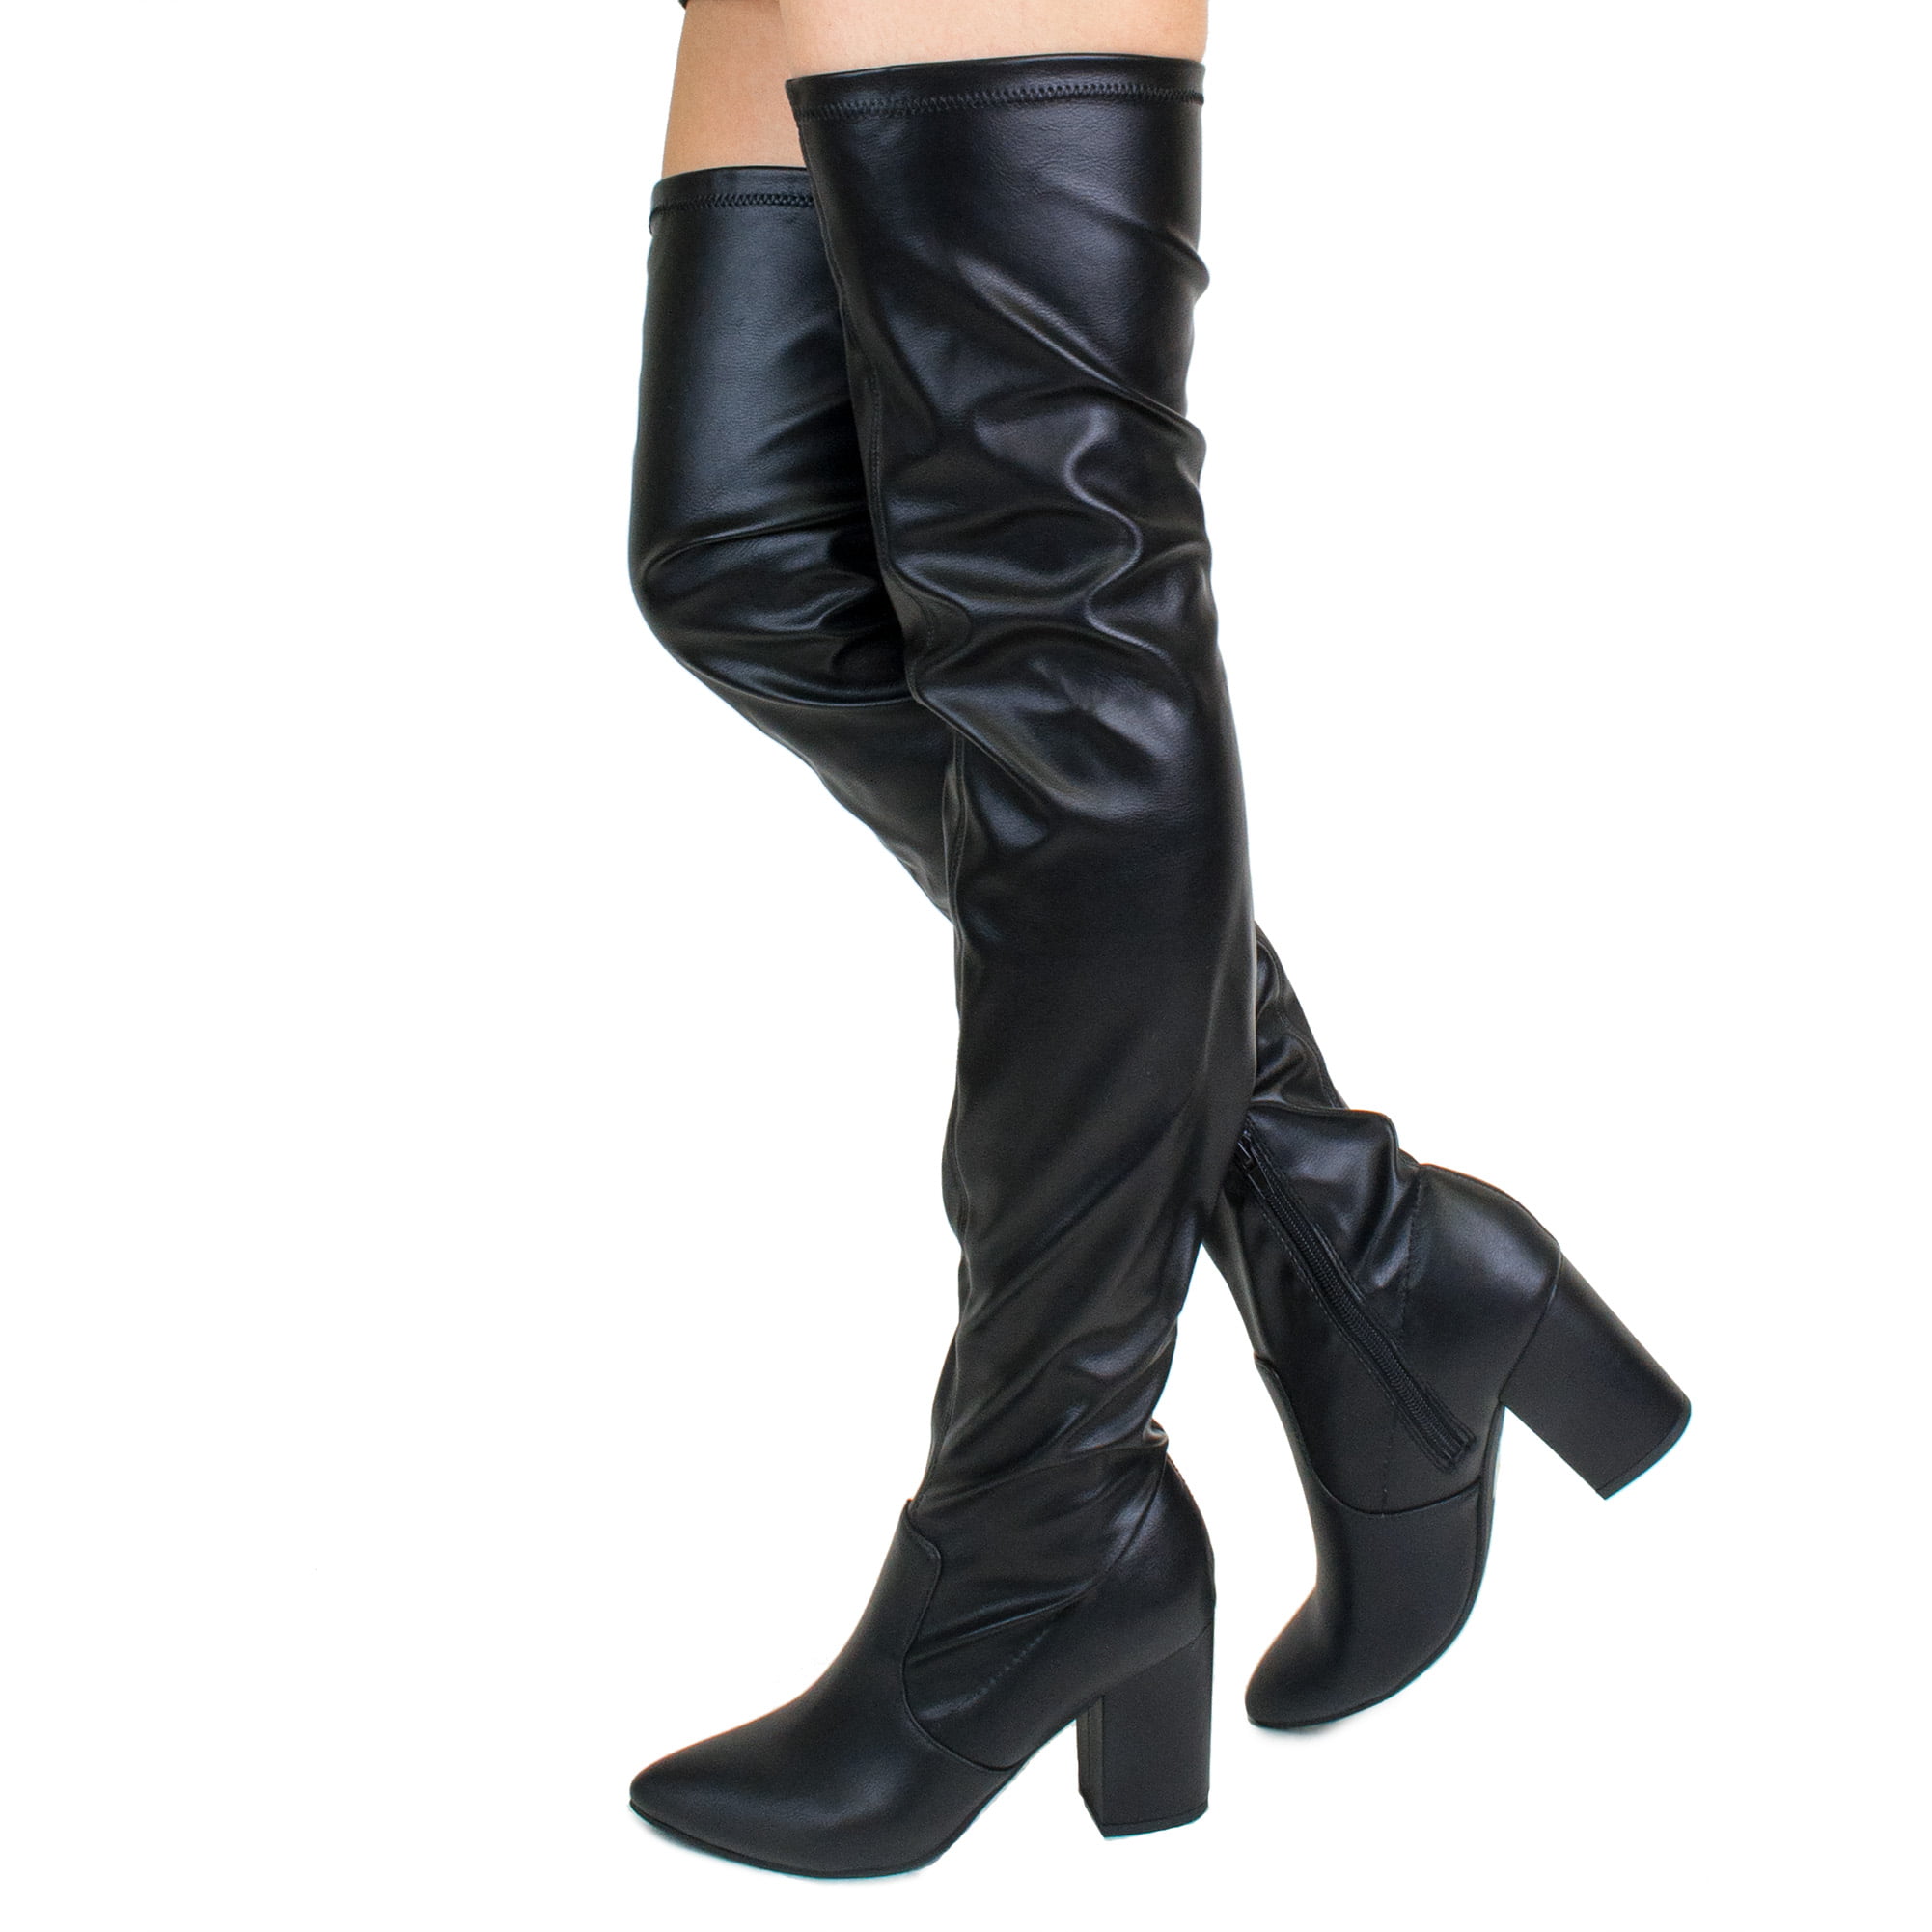 WOMEN LADIES OVER KNEE BOOTS ZIP KNEE HIGH THIGH STRETCH LOW MID HEEL BOOTS SIZE 